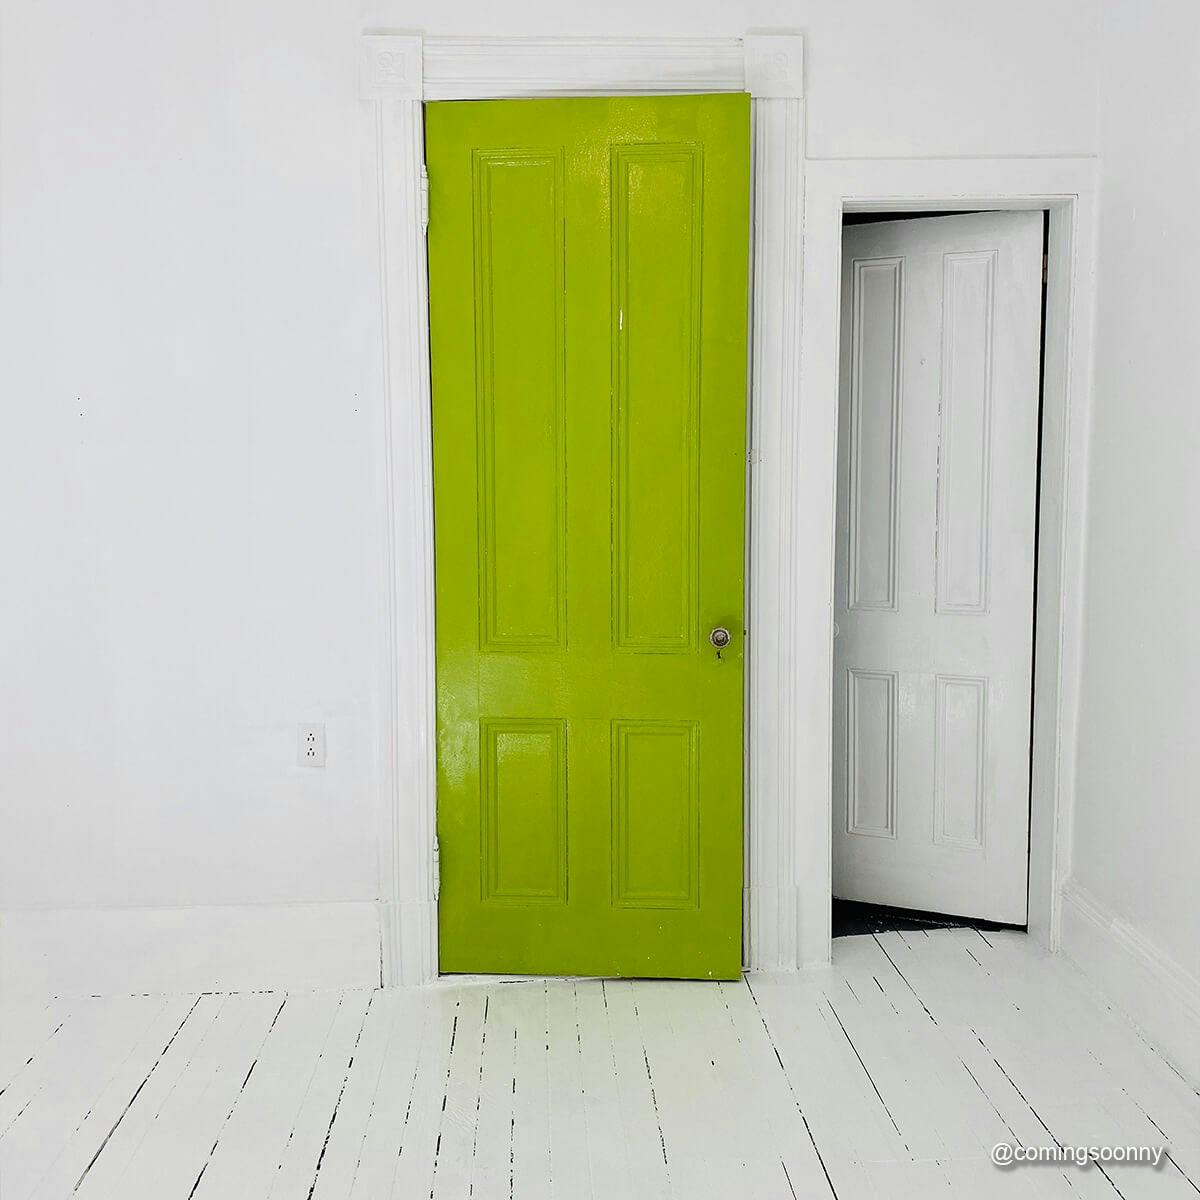 A door painted with PRETTY UGLY in an all-white room